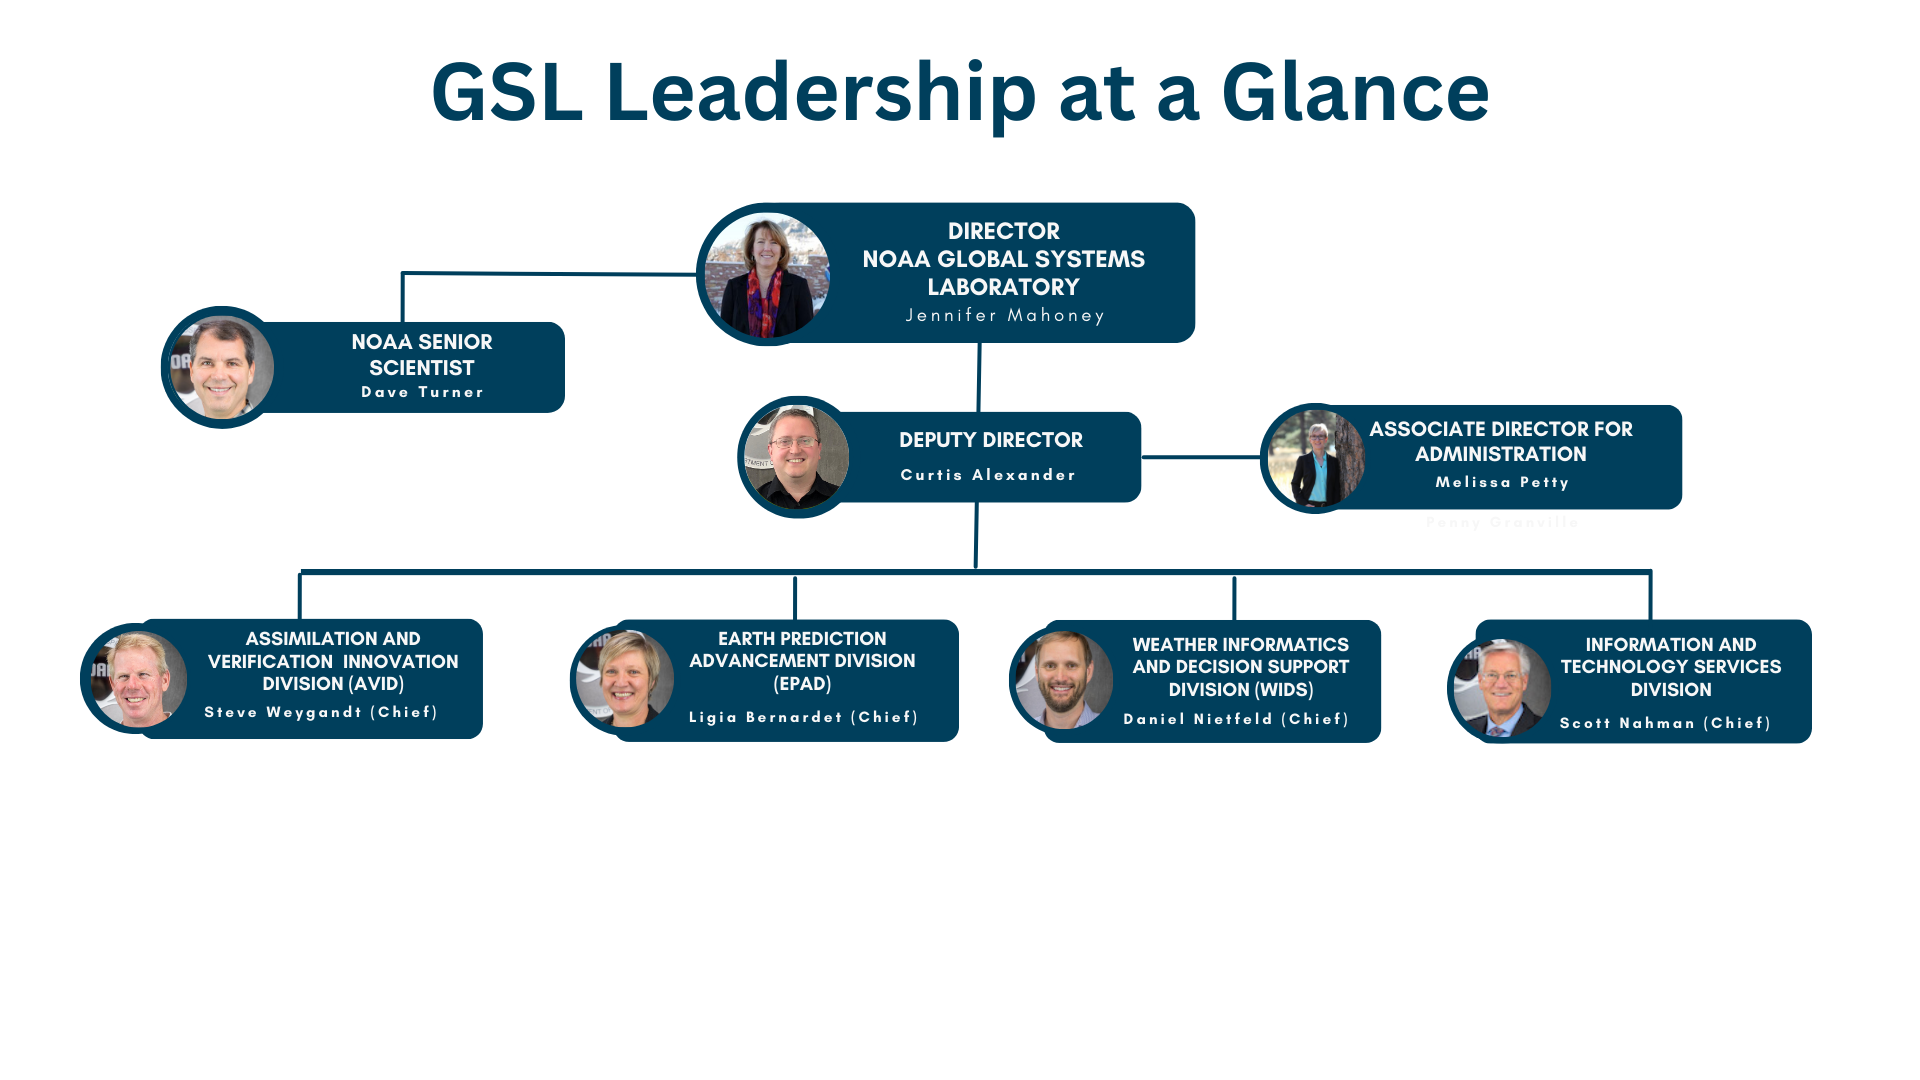 Global Systems Laboratory leadership at a glance